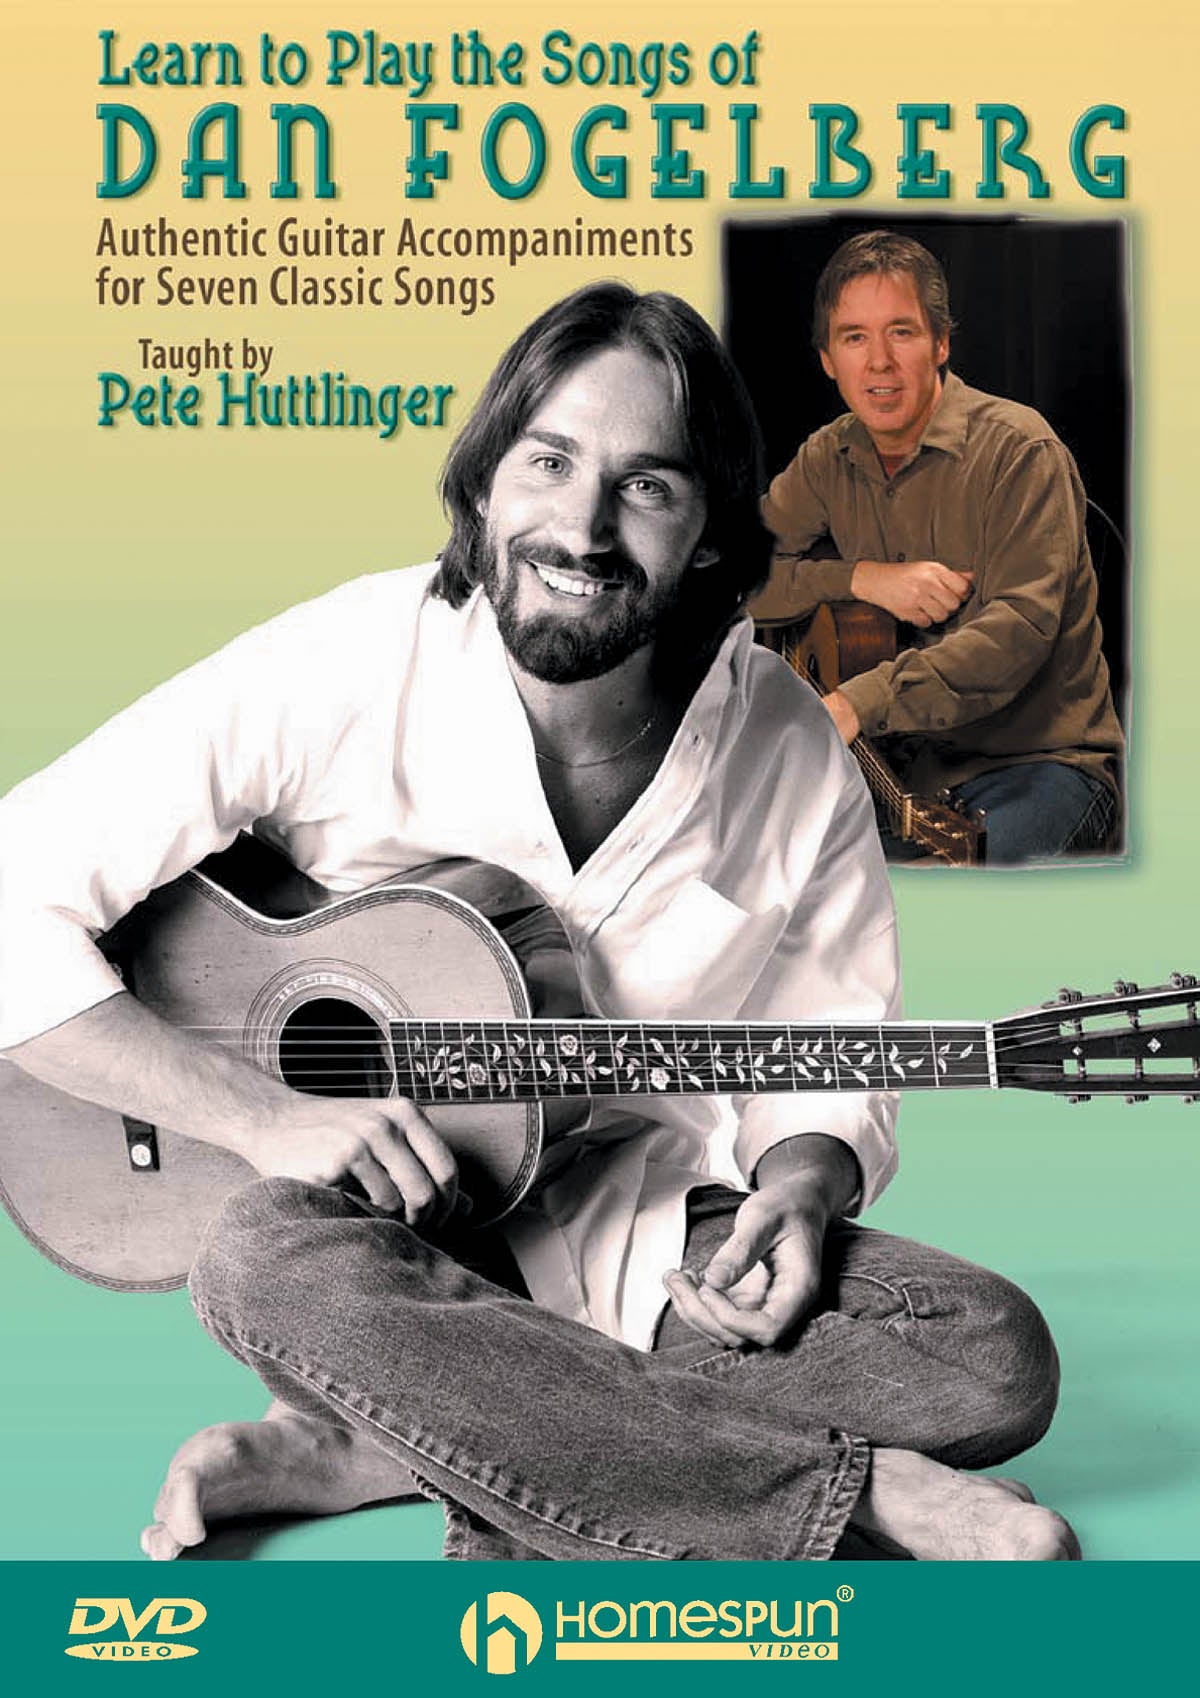 Image 1 of DVD - Learn to Play the Songs of Dan Fogelberg - Authentic Guitar Accompaniment for 7 Classic Songs - SKU# 300-DVD383 : Product Type Media : Elderly Instruments